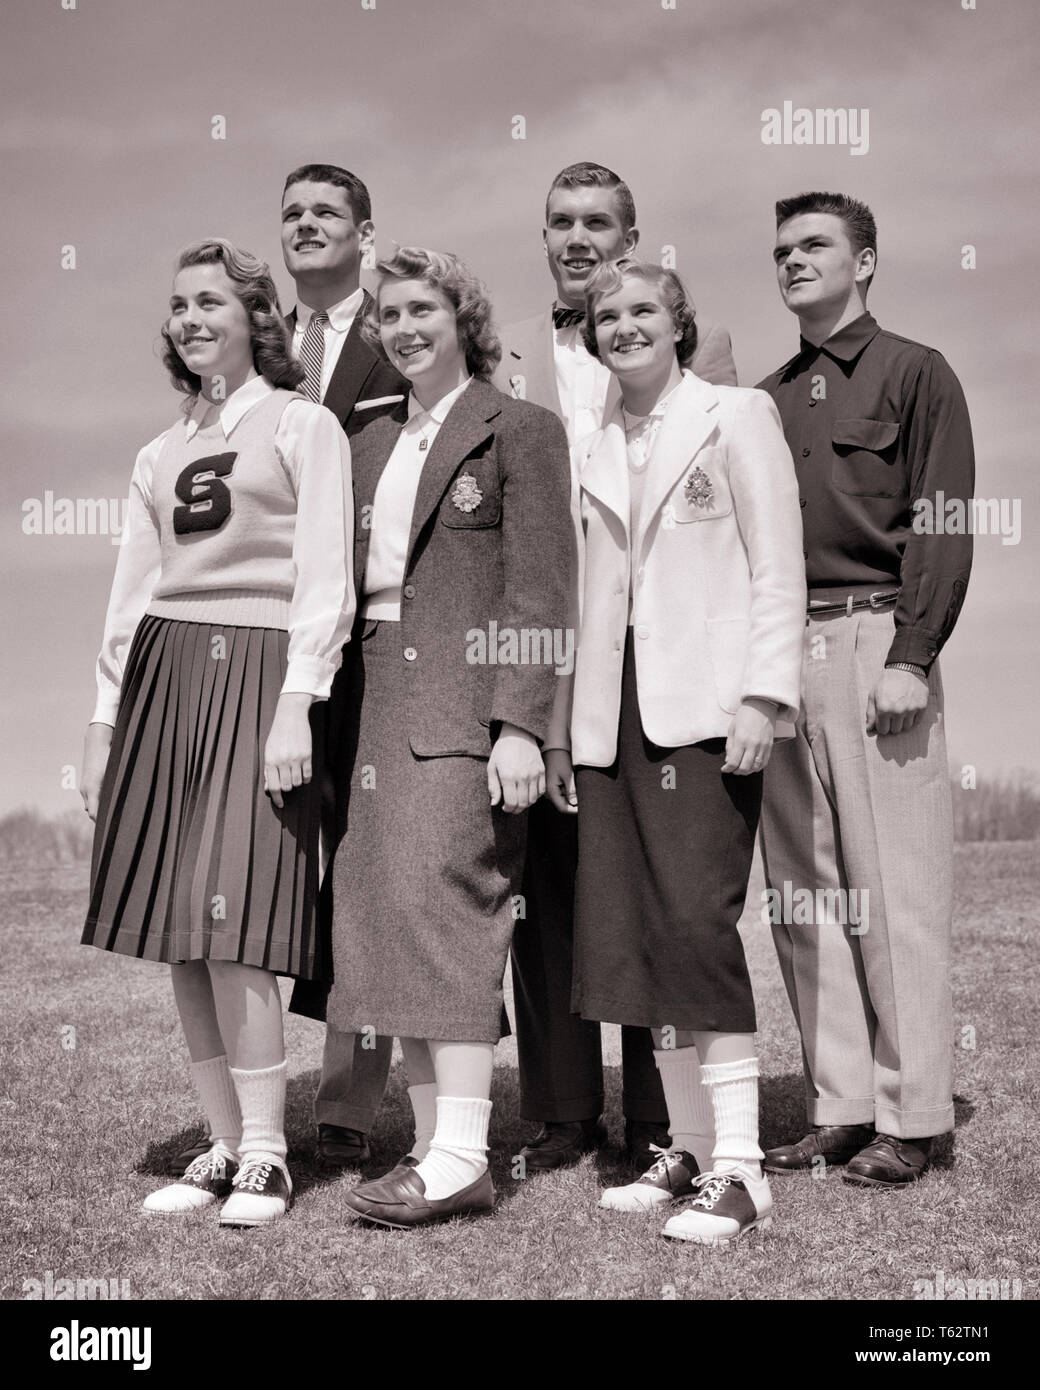 1950s group portrait of standing SMILING high school teenagers BOYS AND GIRLS  - j7050 HAR001 HARS LIFESTYLE FEMALES HEALTHINESS COPY SPACE FRIENDSHIP FULL-LENGTH MALES TEENAGE GIRL SIX TEENAGE BOY B&W SKIRTS GOALS SUIT AND TIE DREAMS HAPPINESS CHEERFUL STYLES LEADERSHIP LOW ANGLE OF HIGH SCHOOL SMILES HIGH SCHOOLS CONNECTION SADDLE OXFORDS BLAZERS FRIENDLY JOYFUL STYLISH BOBBY SOX COOPERATION FASHIONS GROWTH JUVENILES SCHOOLMATES TOGETHERNESS BLACK AND WHITE BOBBY SOCKS CAUCASIAN ETHNICITY CLASSMATES HAR001 OLD FASHIONED Stock Photo